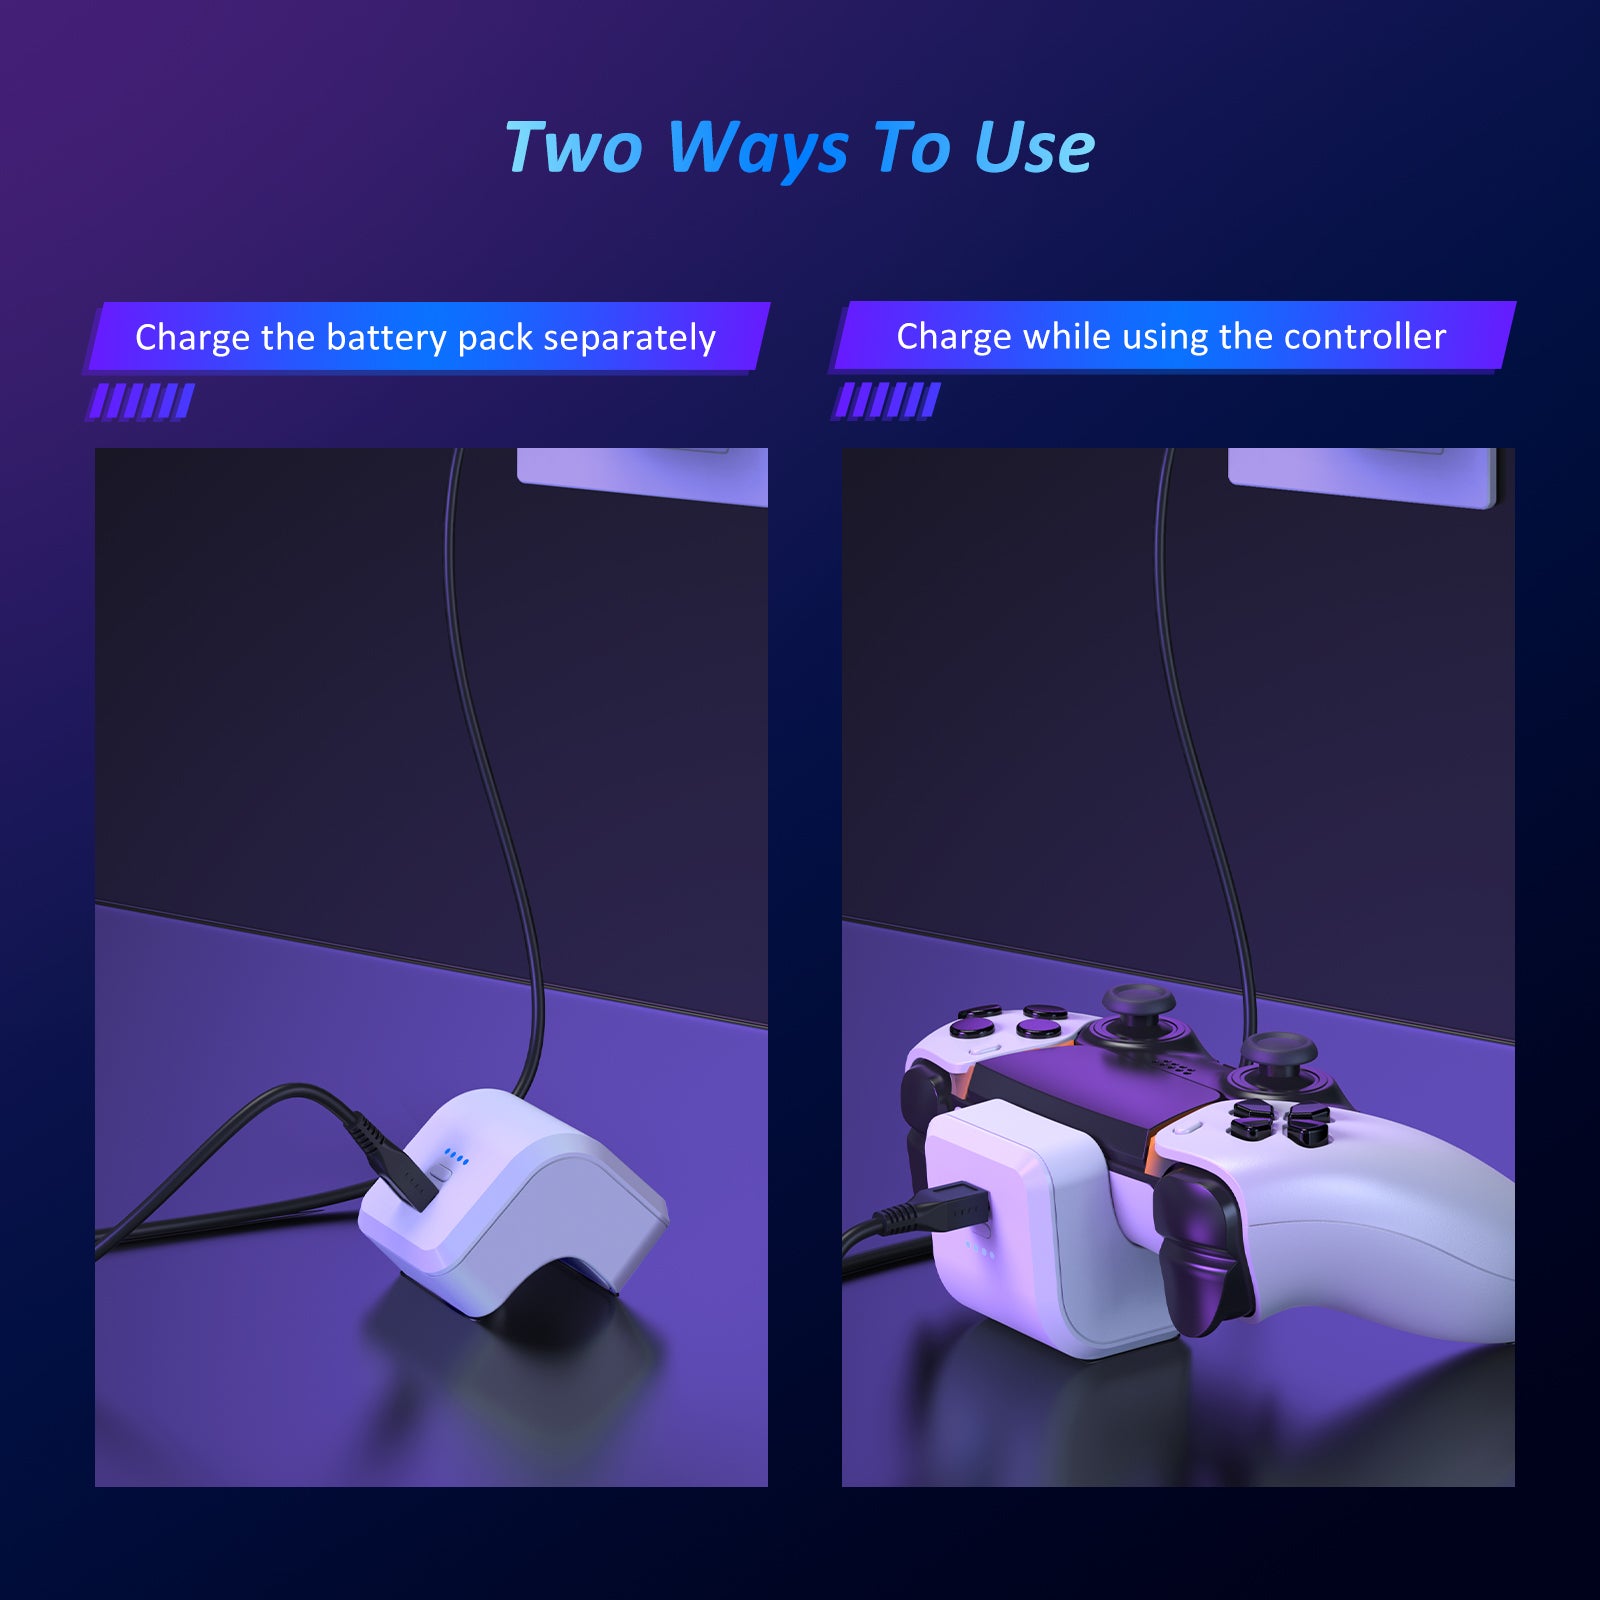 There are two ways to charge thebattery pack: you can charge it separately, or you can plug it into the controller for charging.